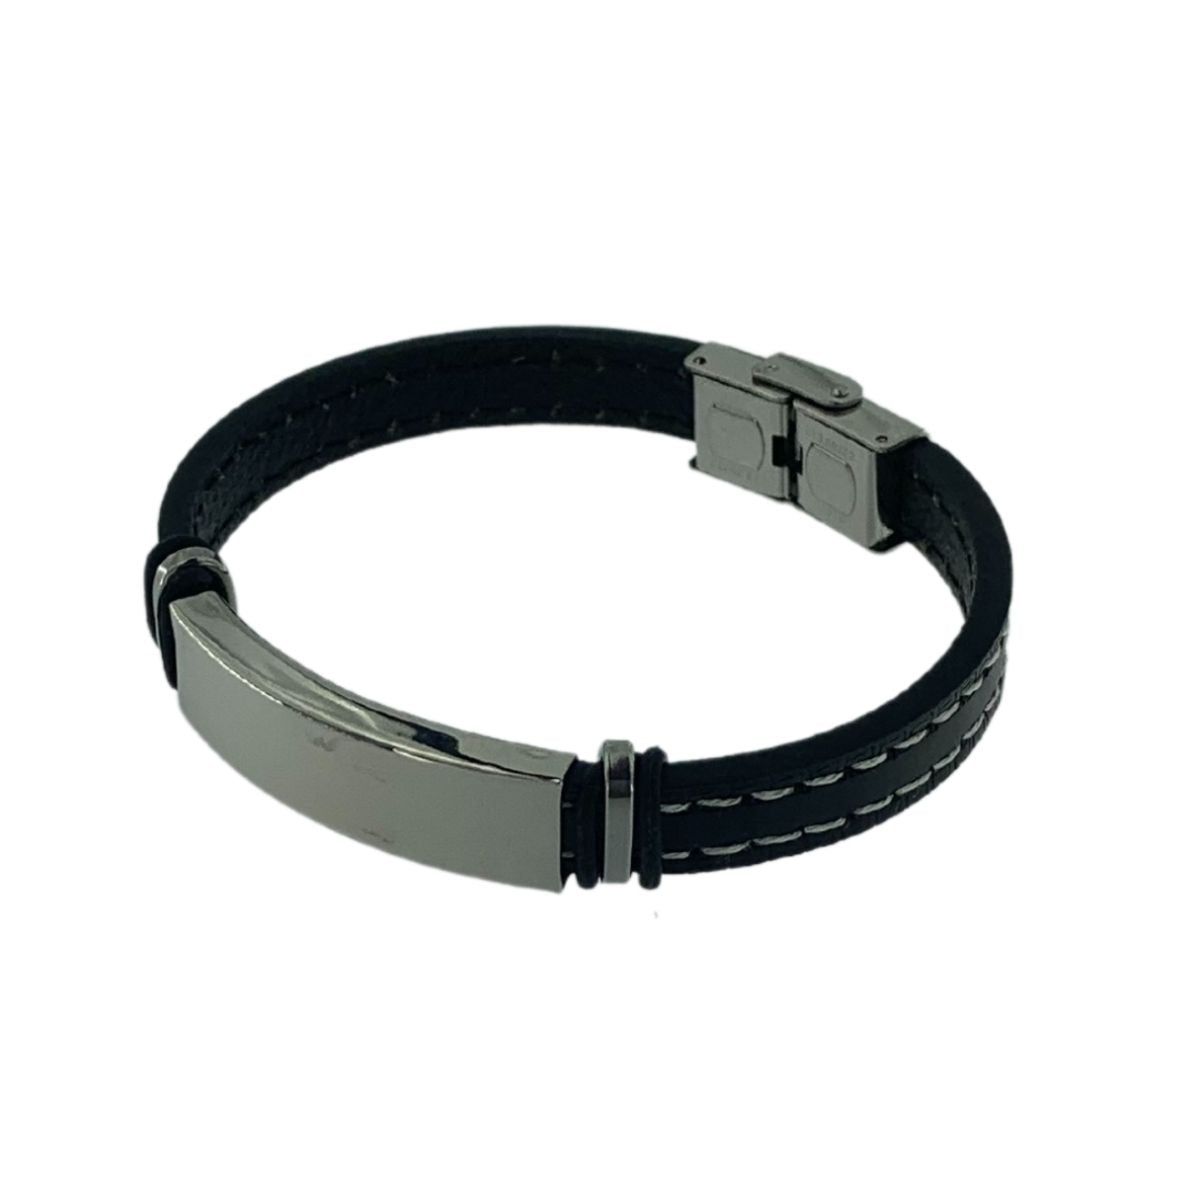 BLACK LEATHER BRACELET WITH STITCHING AND PLATE